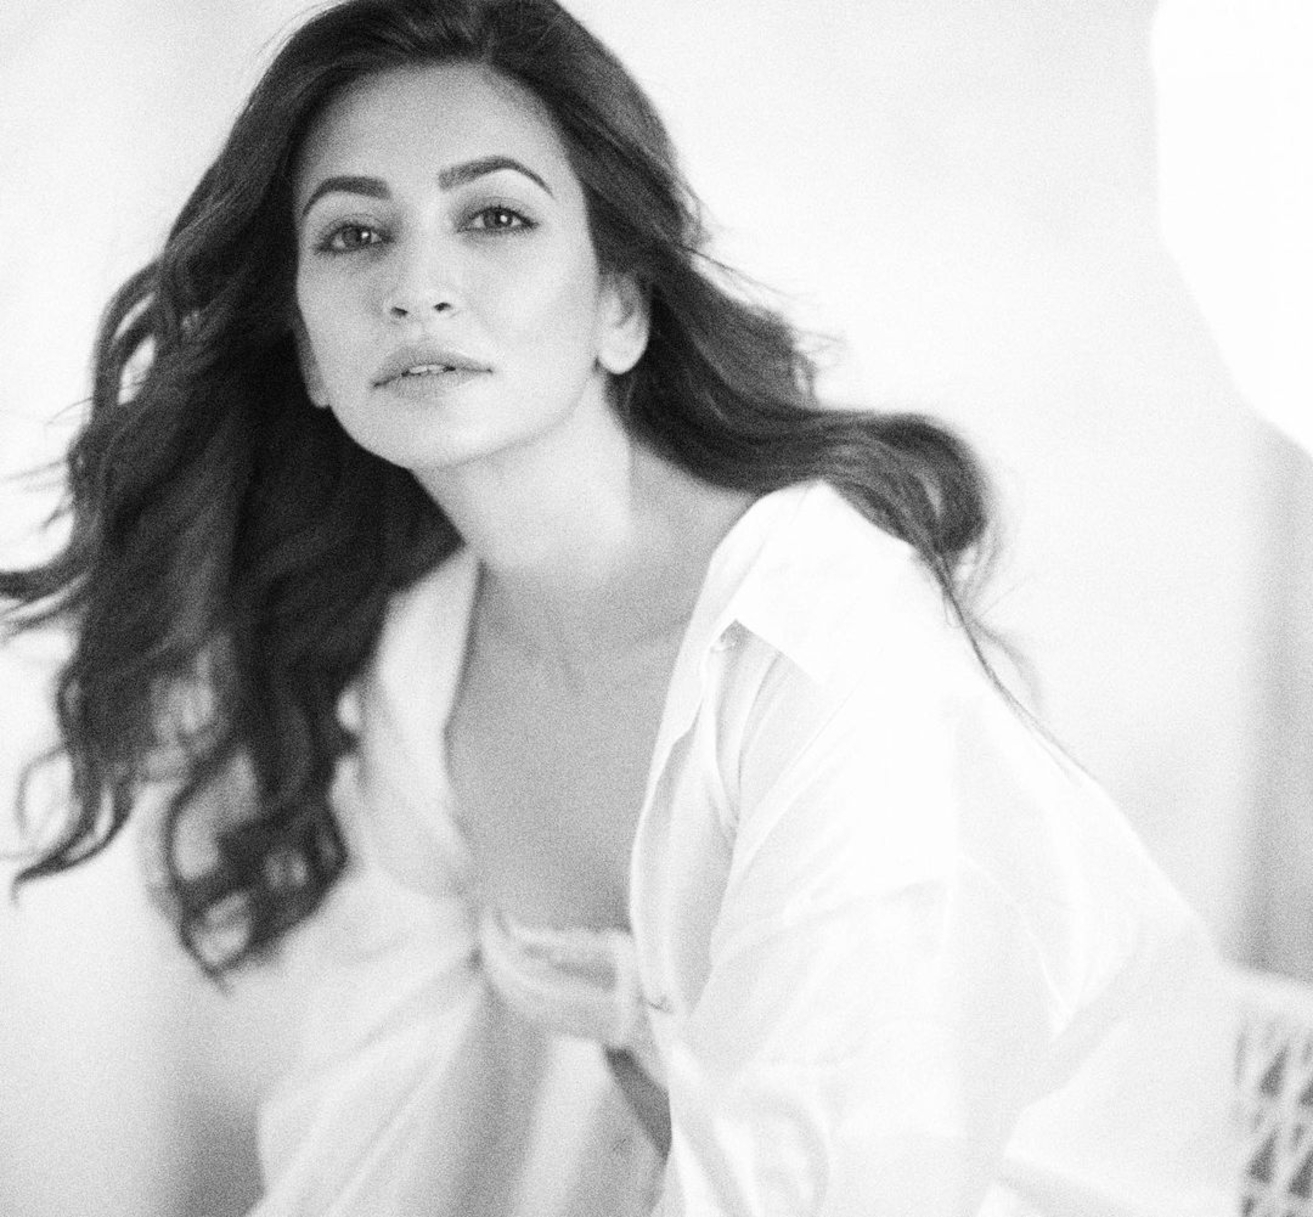 Kriti Kharbanda Raises Temperature With Her Steamy Looks Check Out